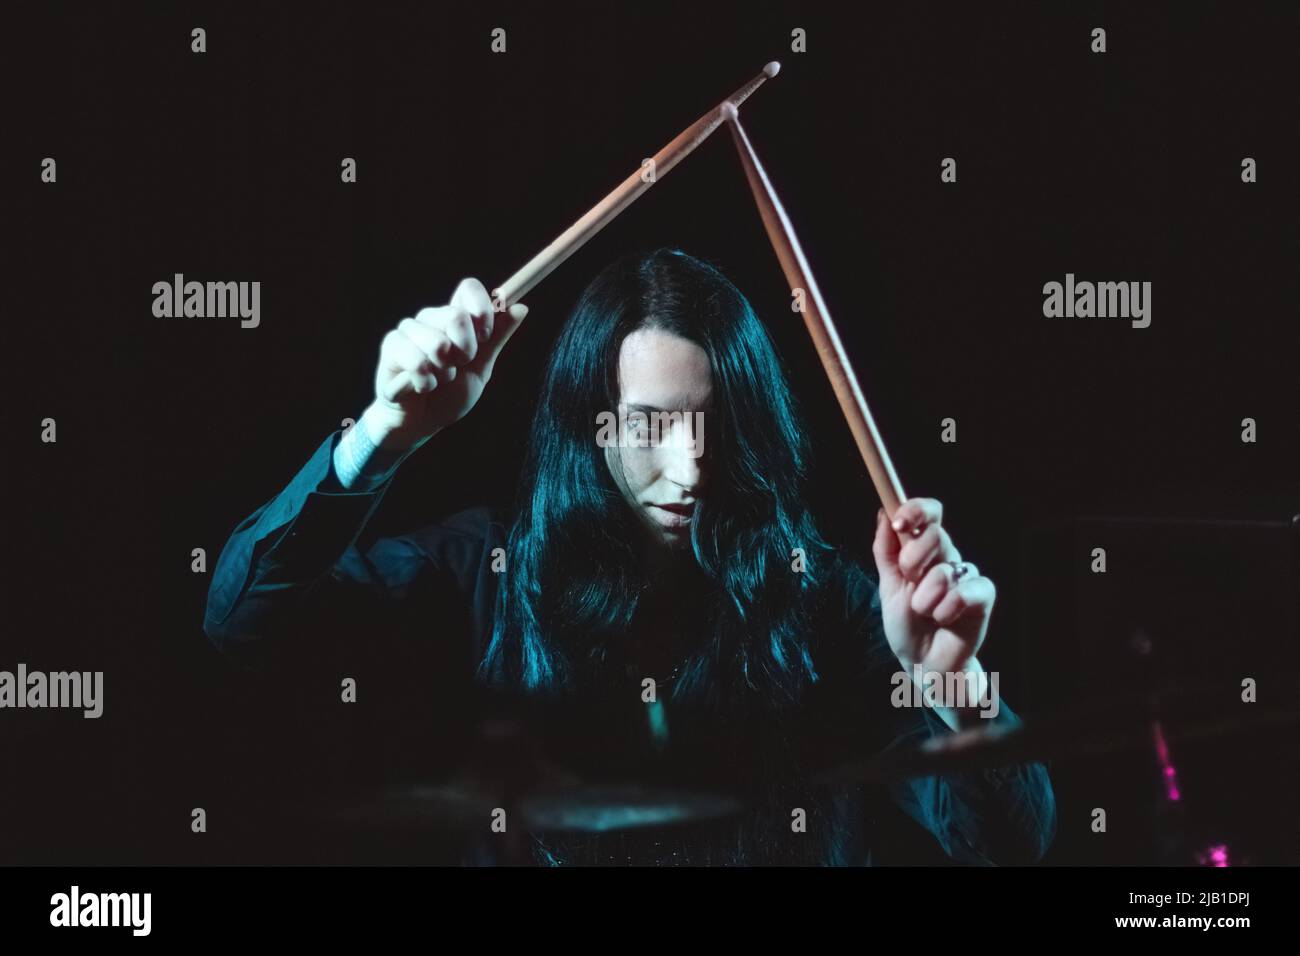 A female metal drummer with long hair holding up drumsticks behind the drumkit against a dark background Stock Photo